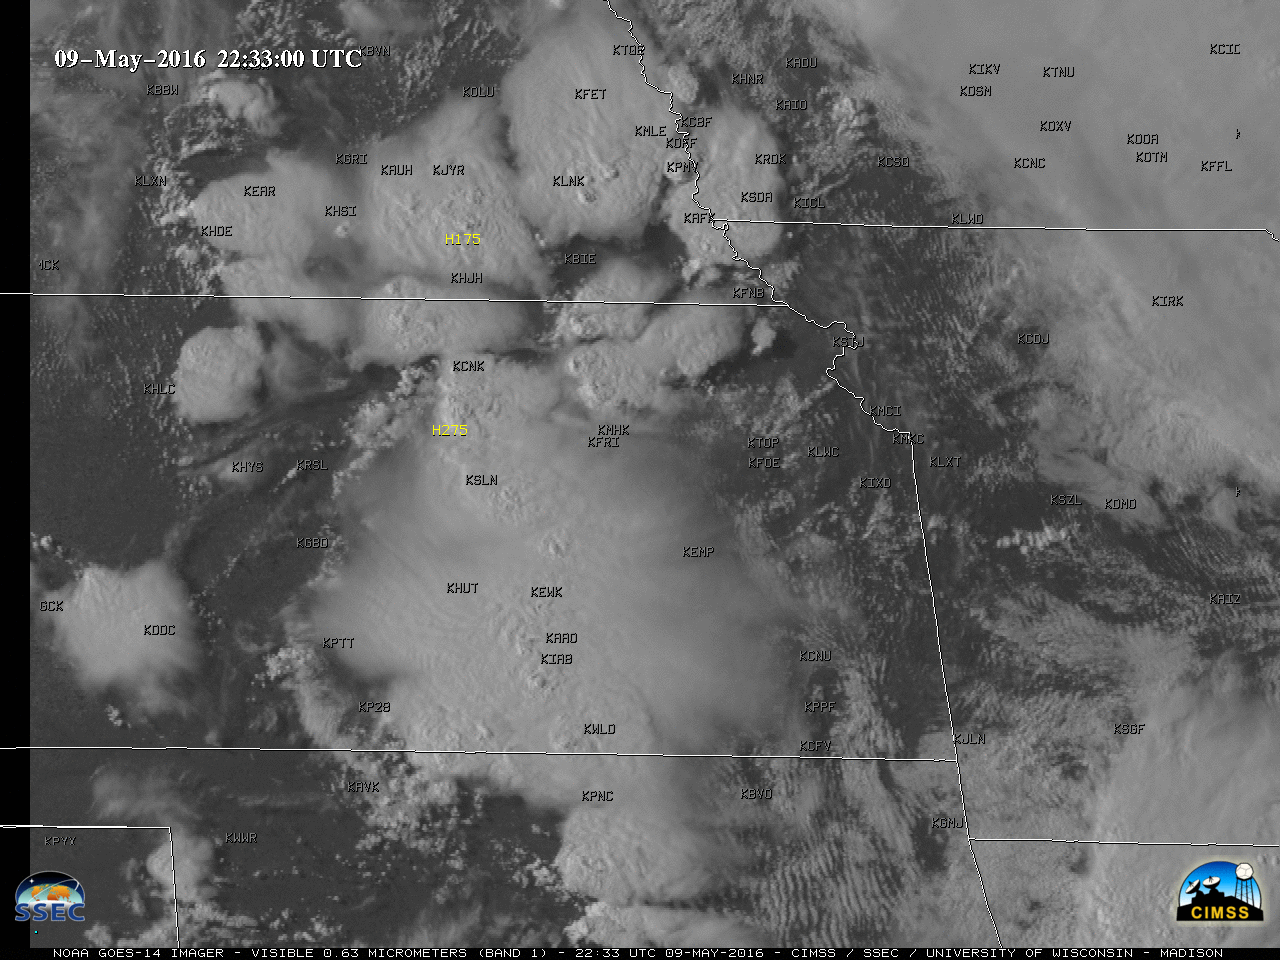 GOES-14 Visible (0.63 um) images, with SPC storm reports [click to play MP4 animation]